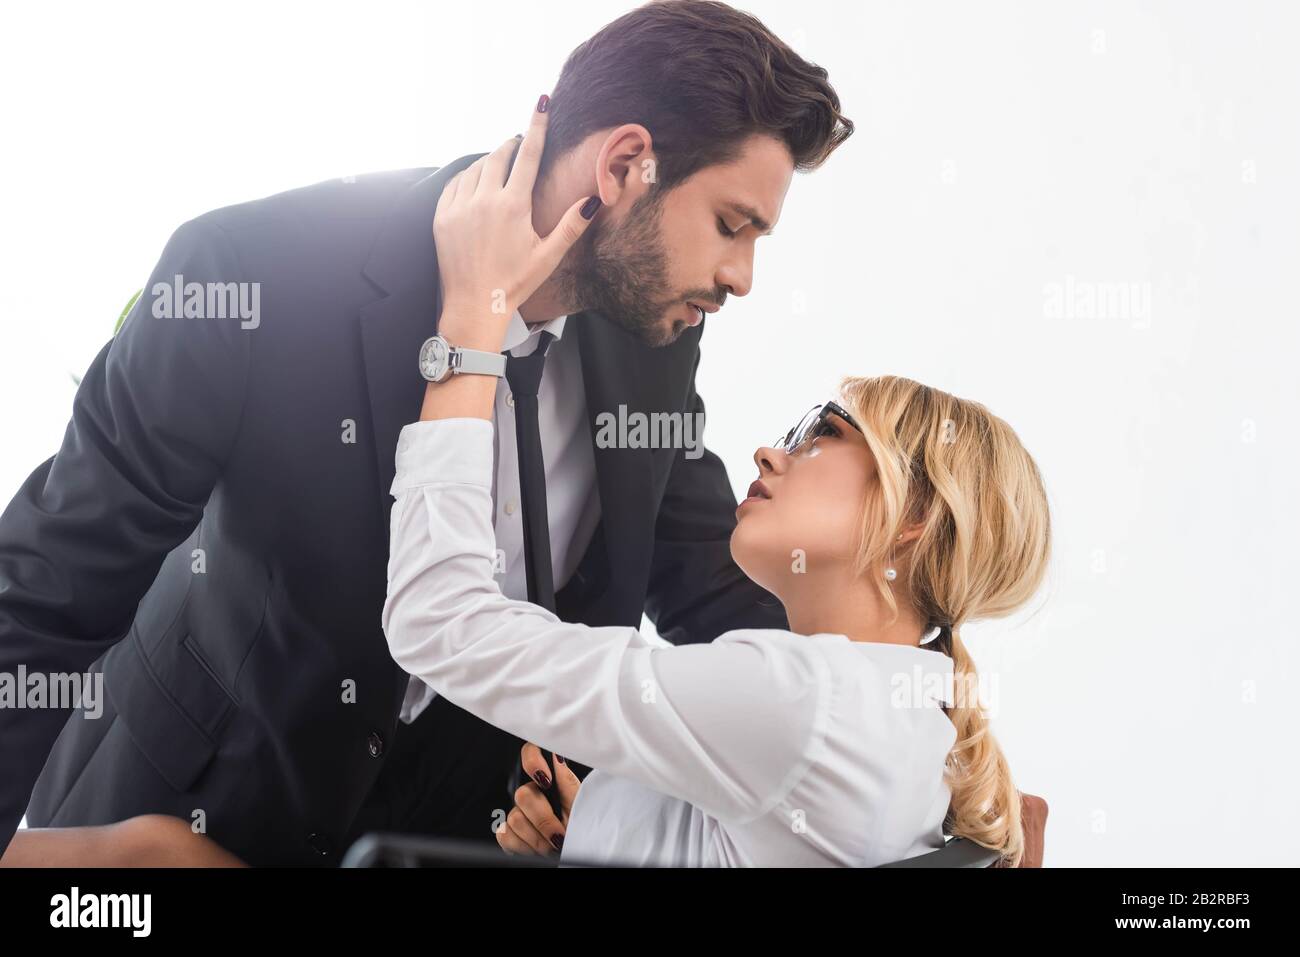 Sexy businesswoman pulling tie of businessman in office Stock Photo